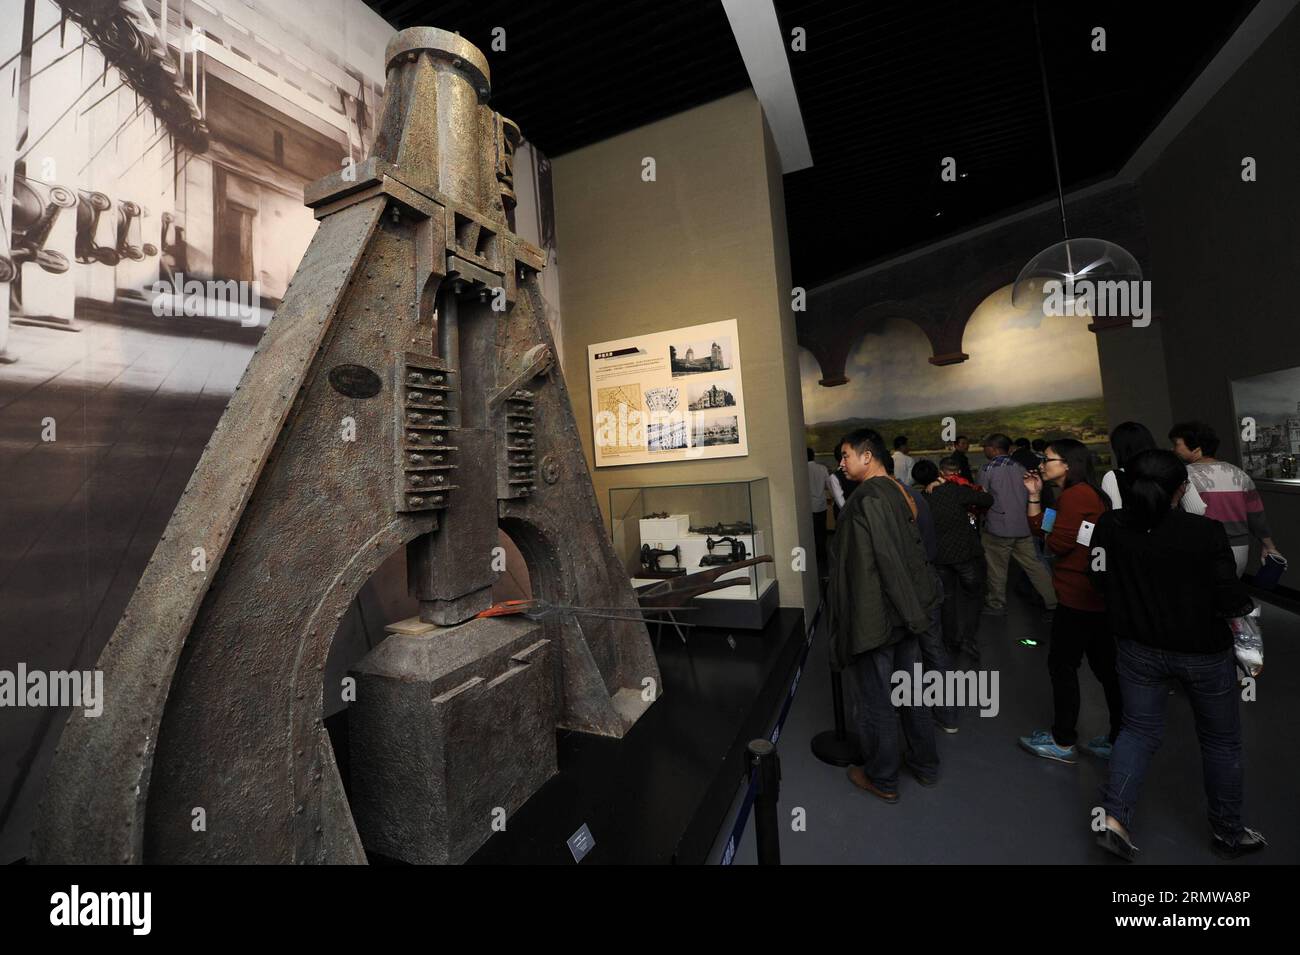 (141016) -- NINGBO, Oct. 16, 2014 -- A visitor looks at a replication of a forging machine at the China Port Museum in Ningbo, east China s Zhejiang Province, Oct. 16, 2014. China Port Museum, also the National Underwater Cultural Heritage Protection Center Ningbo Base, opened on Thursday. ) (mp) CHINA-ZHEJIANG-NINGBO-PORT MUSEUM-OPENING (CN) JuxHuanzong PUBLICATIONxNOTxINxCHN   Ningbo OCT 16 2014 a Visitor Looks AT a replication of a forging Machine AT The China Port Museum in Ningbo East China S Zhejiang Province OCT 16 2014 China Port Museum Thus The National UNDERWATER Cultural Heritage Pr Stock Photo